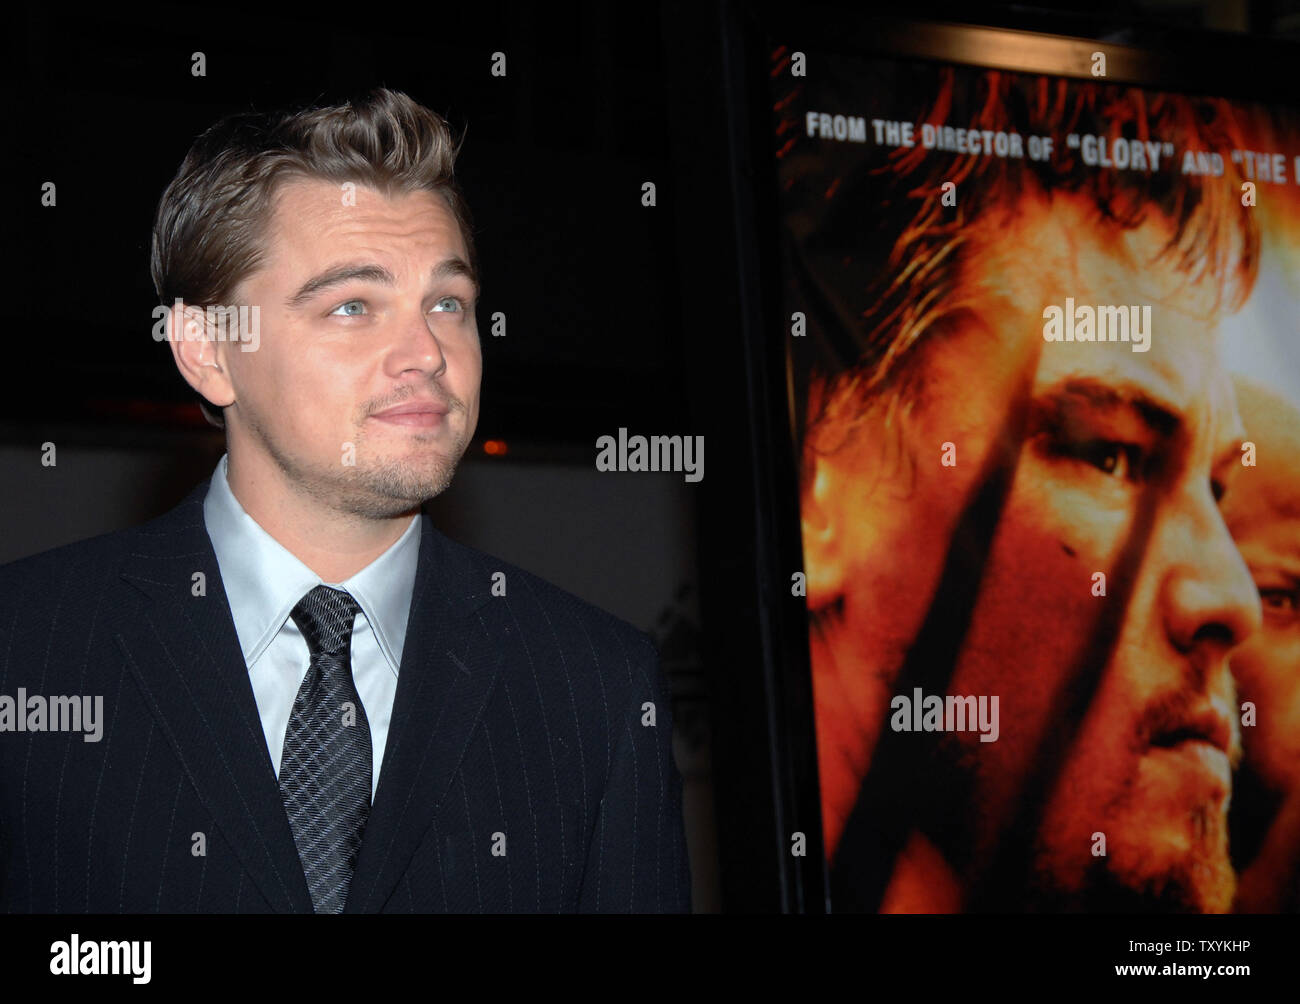 Actor Leonardo DiCaprio, star of the new motion picture drama 'Blood Diamond', stands next to his photograph on the film's poster as he arrives for the premiere of the film at Grauman's Chinese Theatre in the Hollywood section of Los Angeles on December 6, 2006. The film, set in Sierra Leone is about a quest to recover a rare diamond. (UPI Photo/Jim Ruymen) Stock Photo